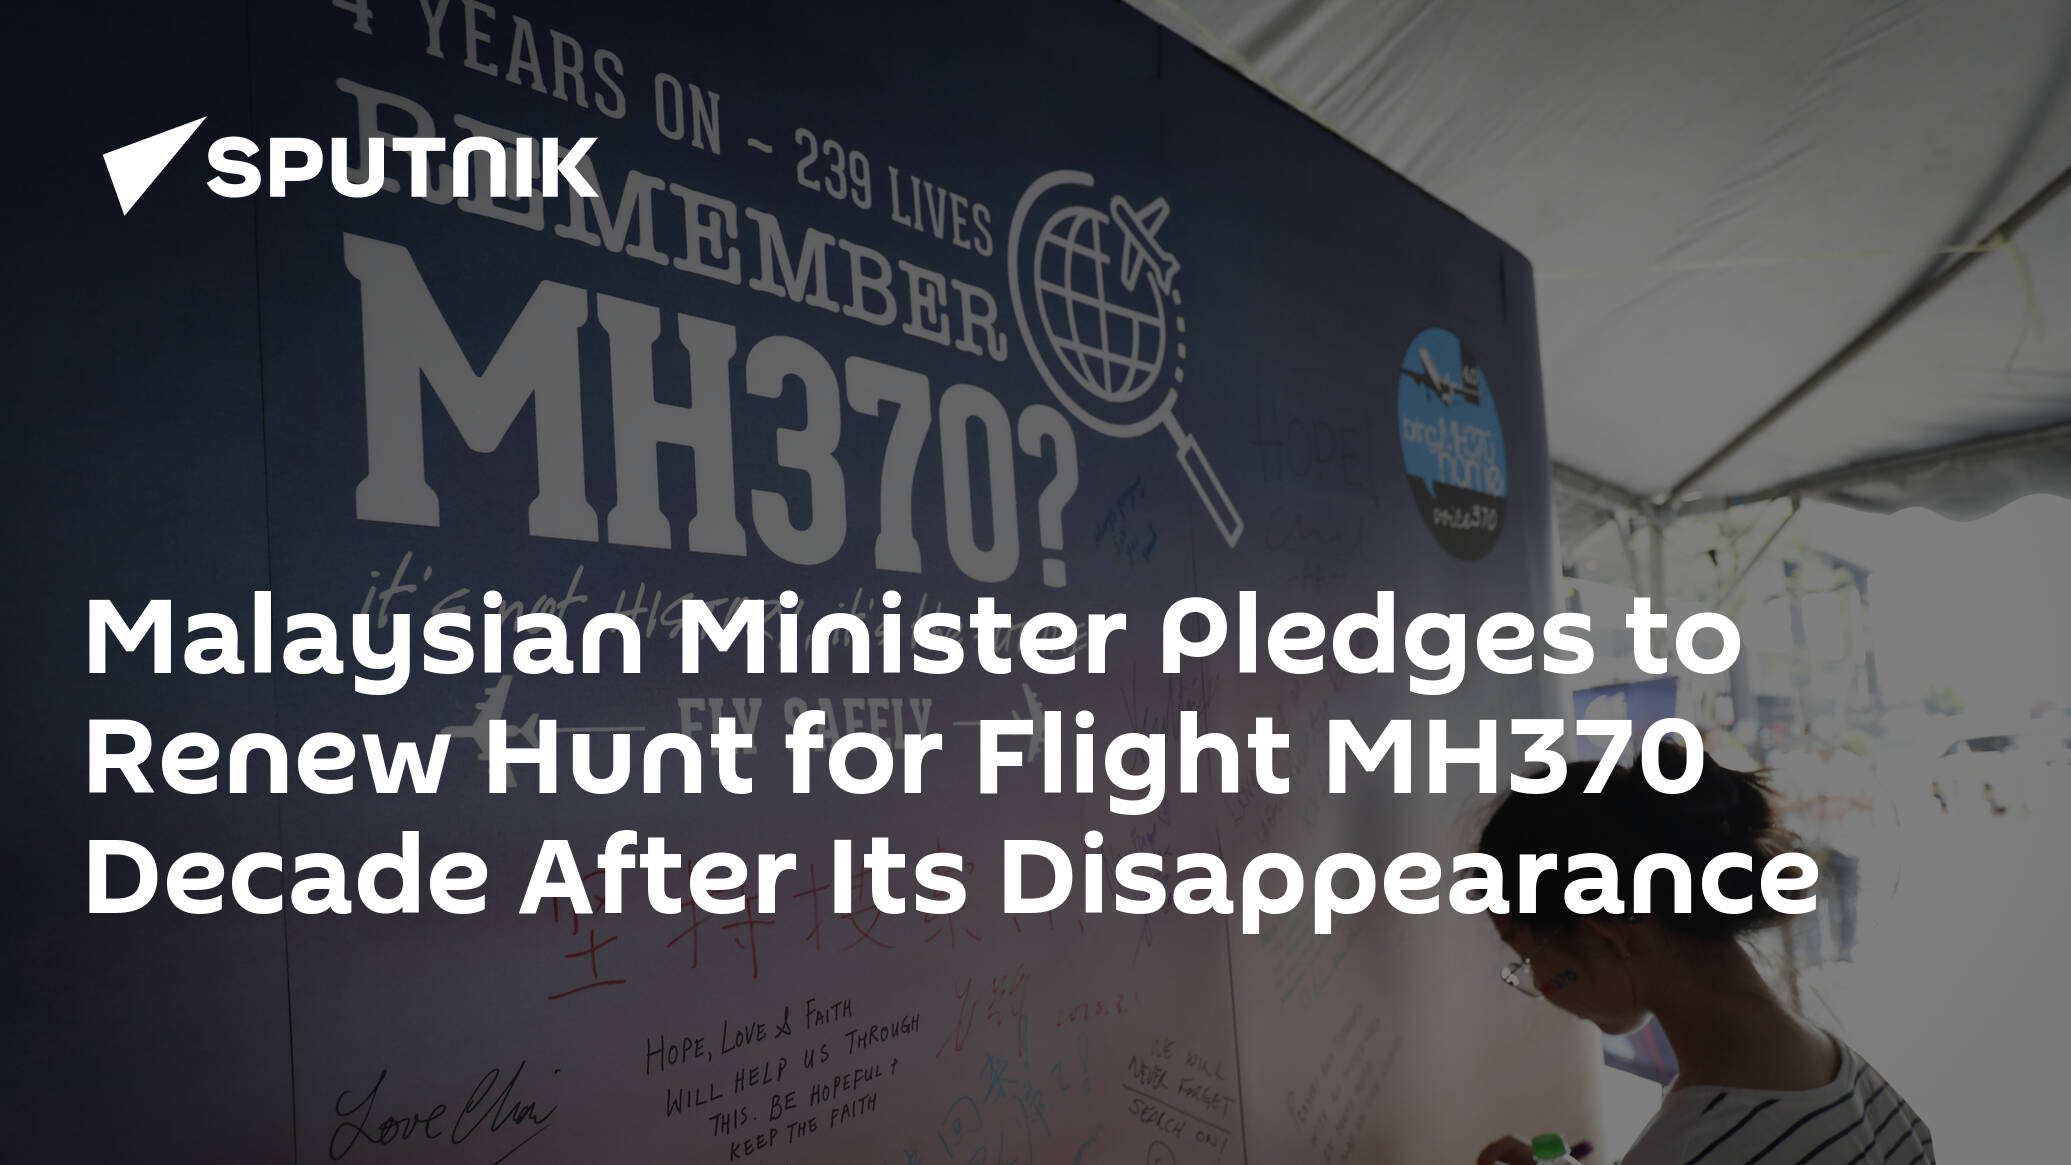 Malaysian Minister Pledges to Renew Hunt for Flight MH370 Decade After Its Disappearance